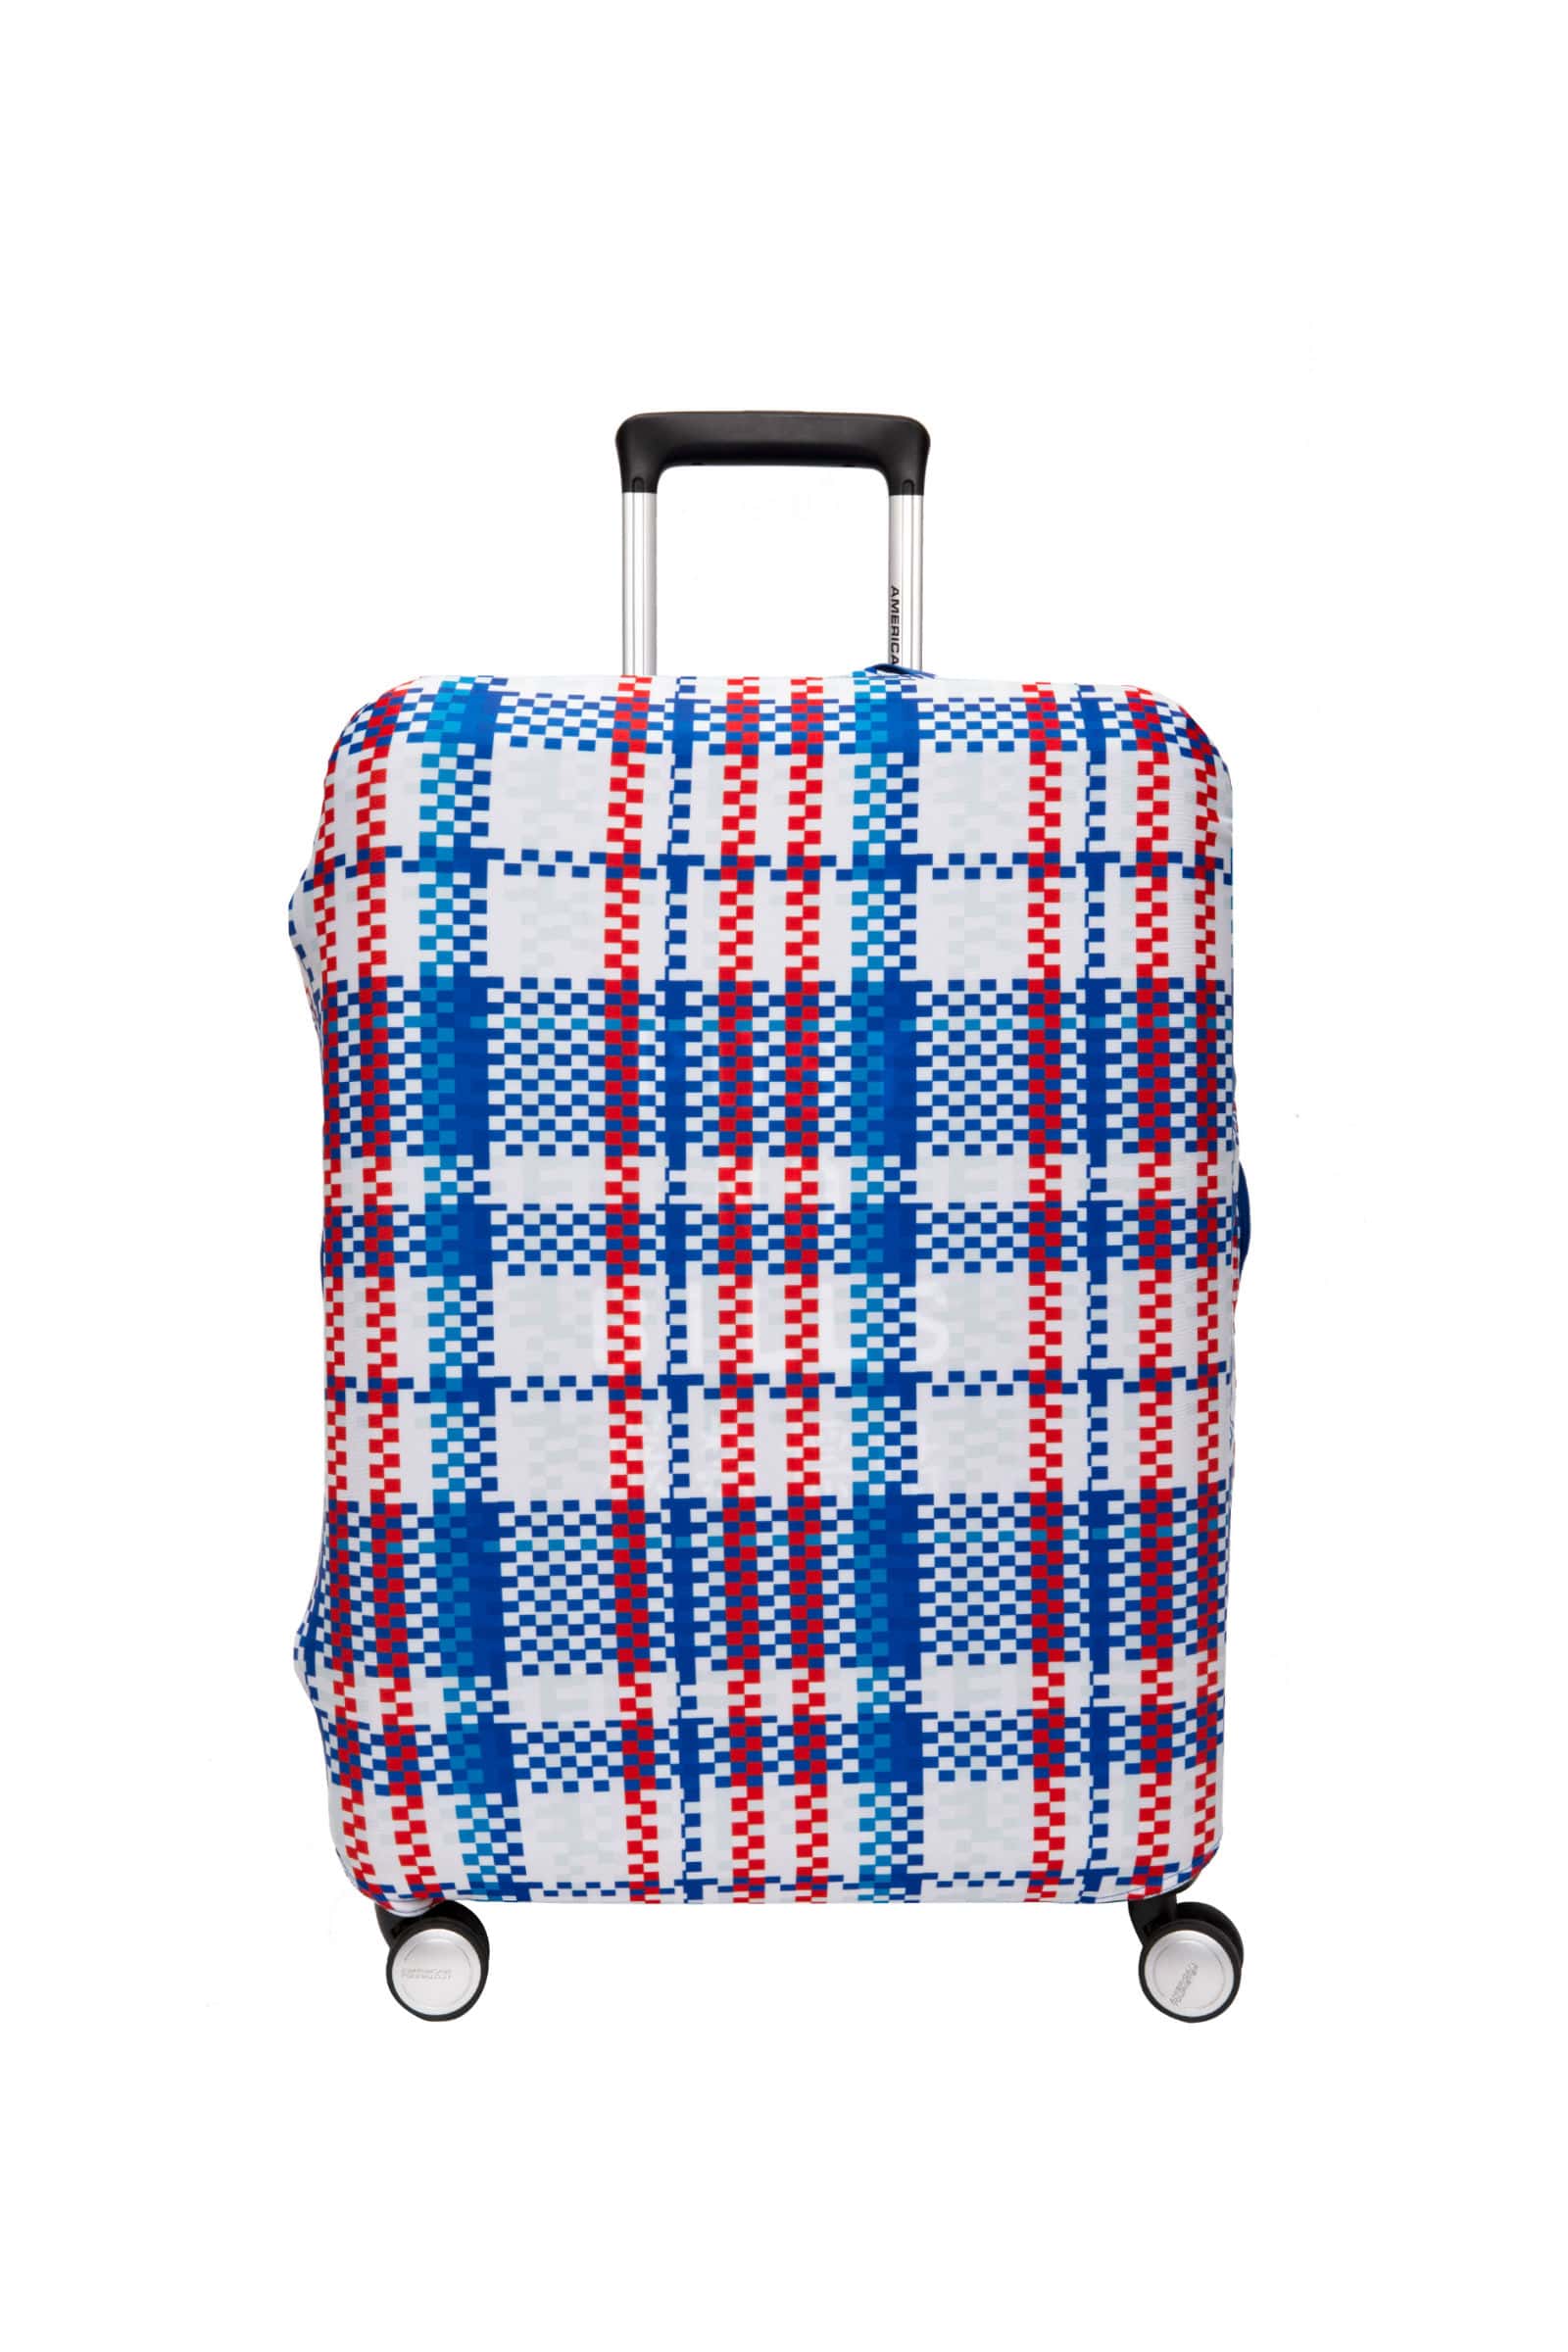 I COME FROM HK 彈性行李箱套 (中)  size | American Tourister